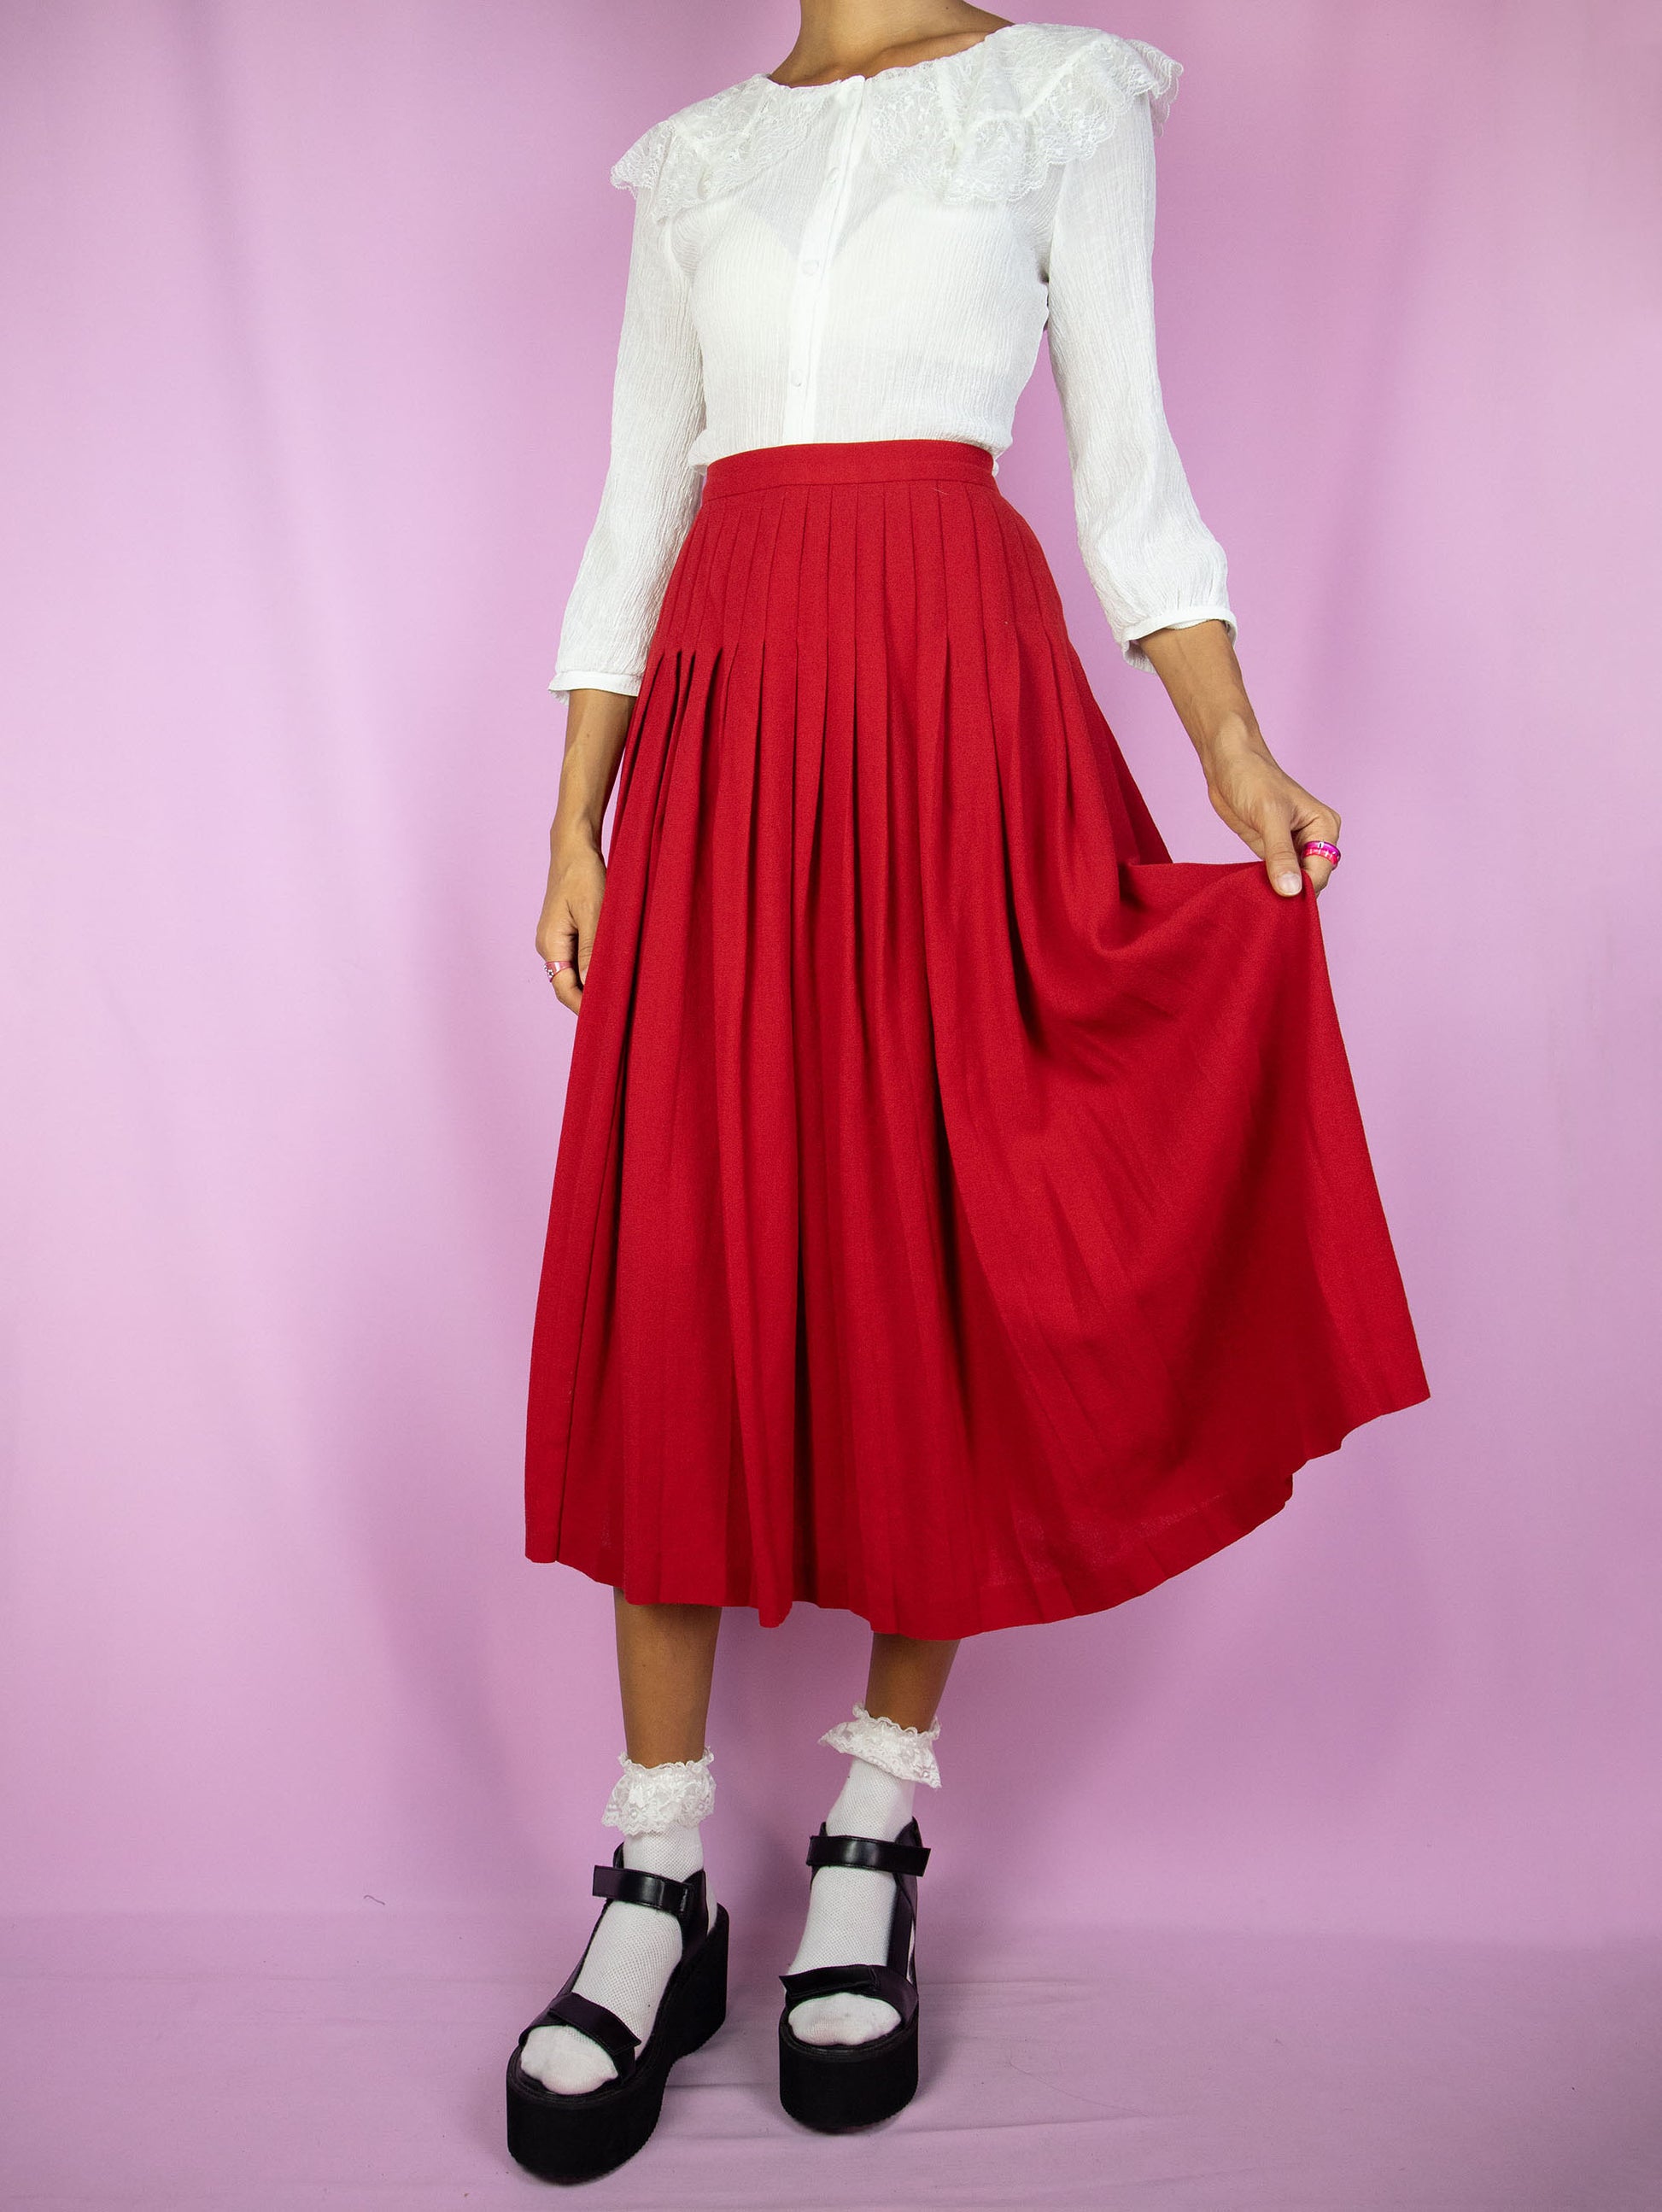 The Vintage 80s Red Wool Pleated Skirt is a midi skirt made of pure new wool featuring a side button closure. Classic preppy 1980s skirt.